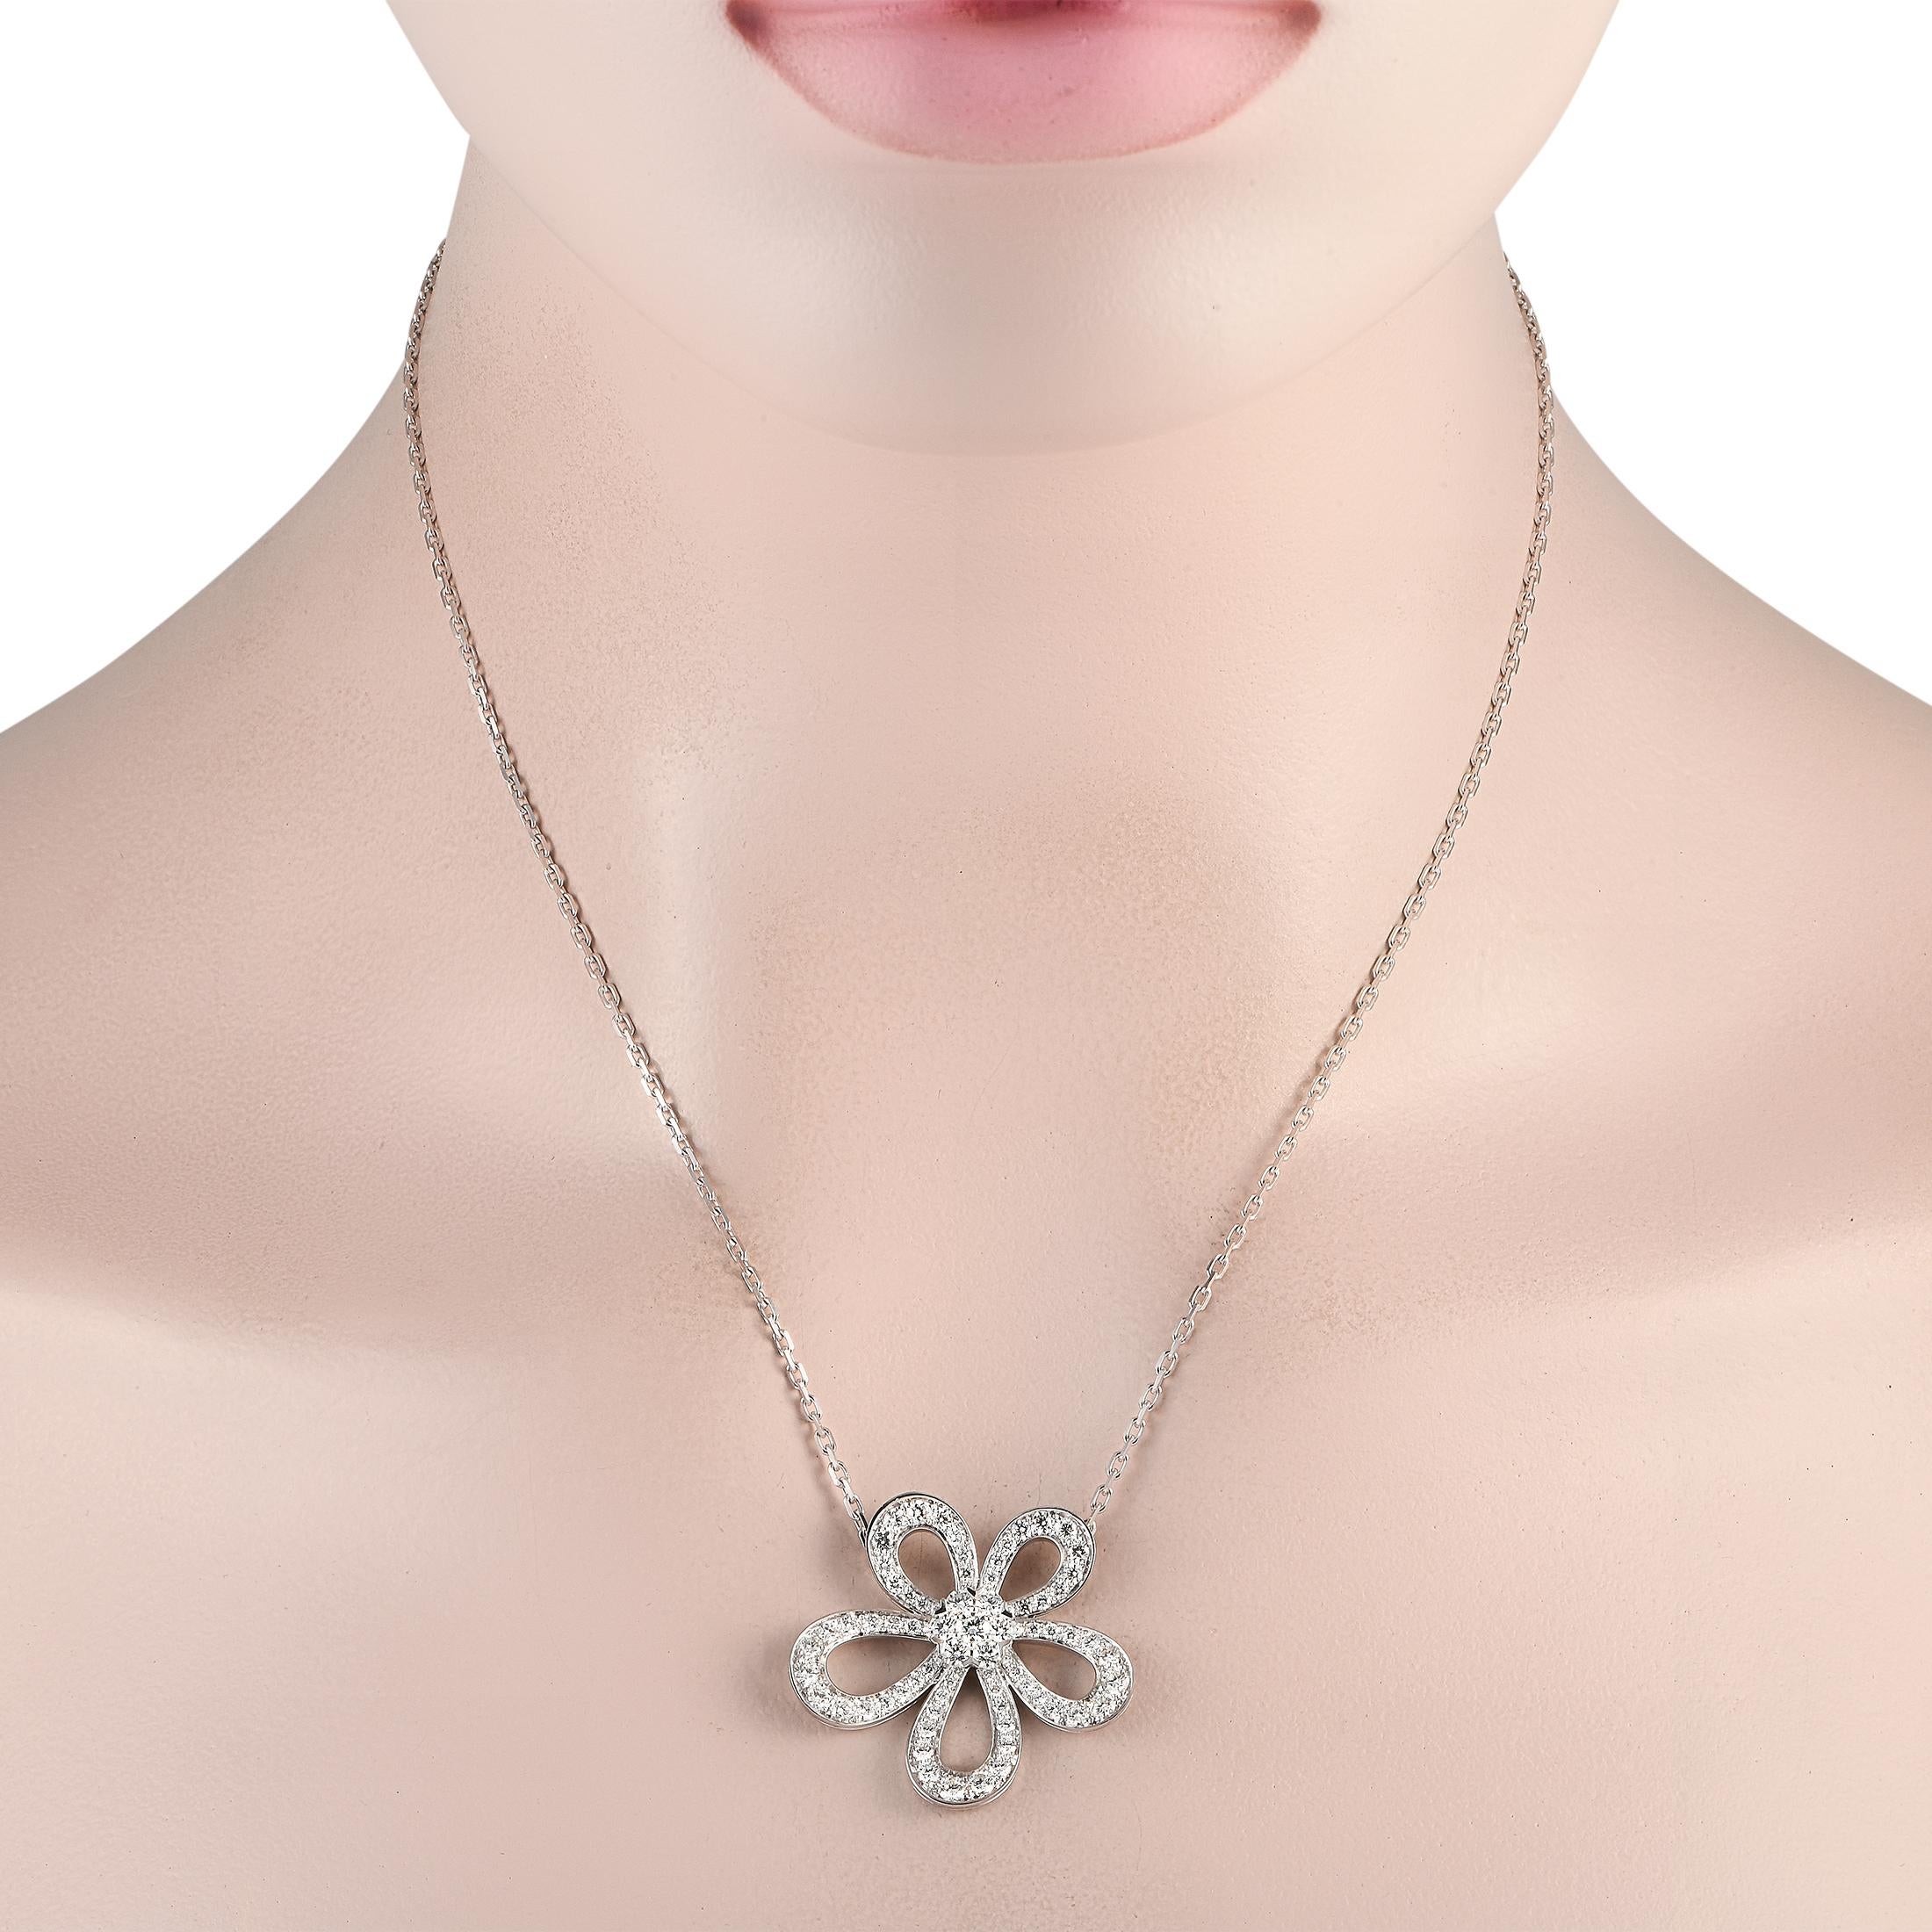 A charming floral motif makes this Van Cleef & Arpels Flower Lace pendant simply unforgettable. Crafted from 18K White Gold, this piece features a flower shaped pendant measuring 1.15 long by 1.25 wide suspended from an 18 chain. Sparkling Diamonds